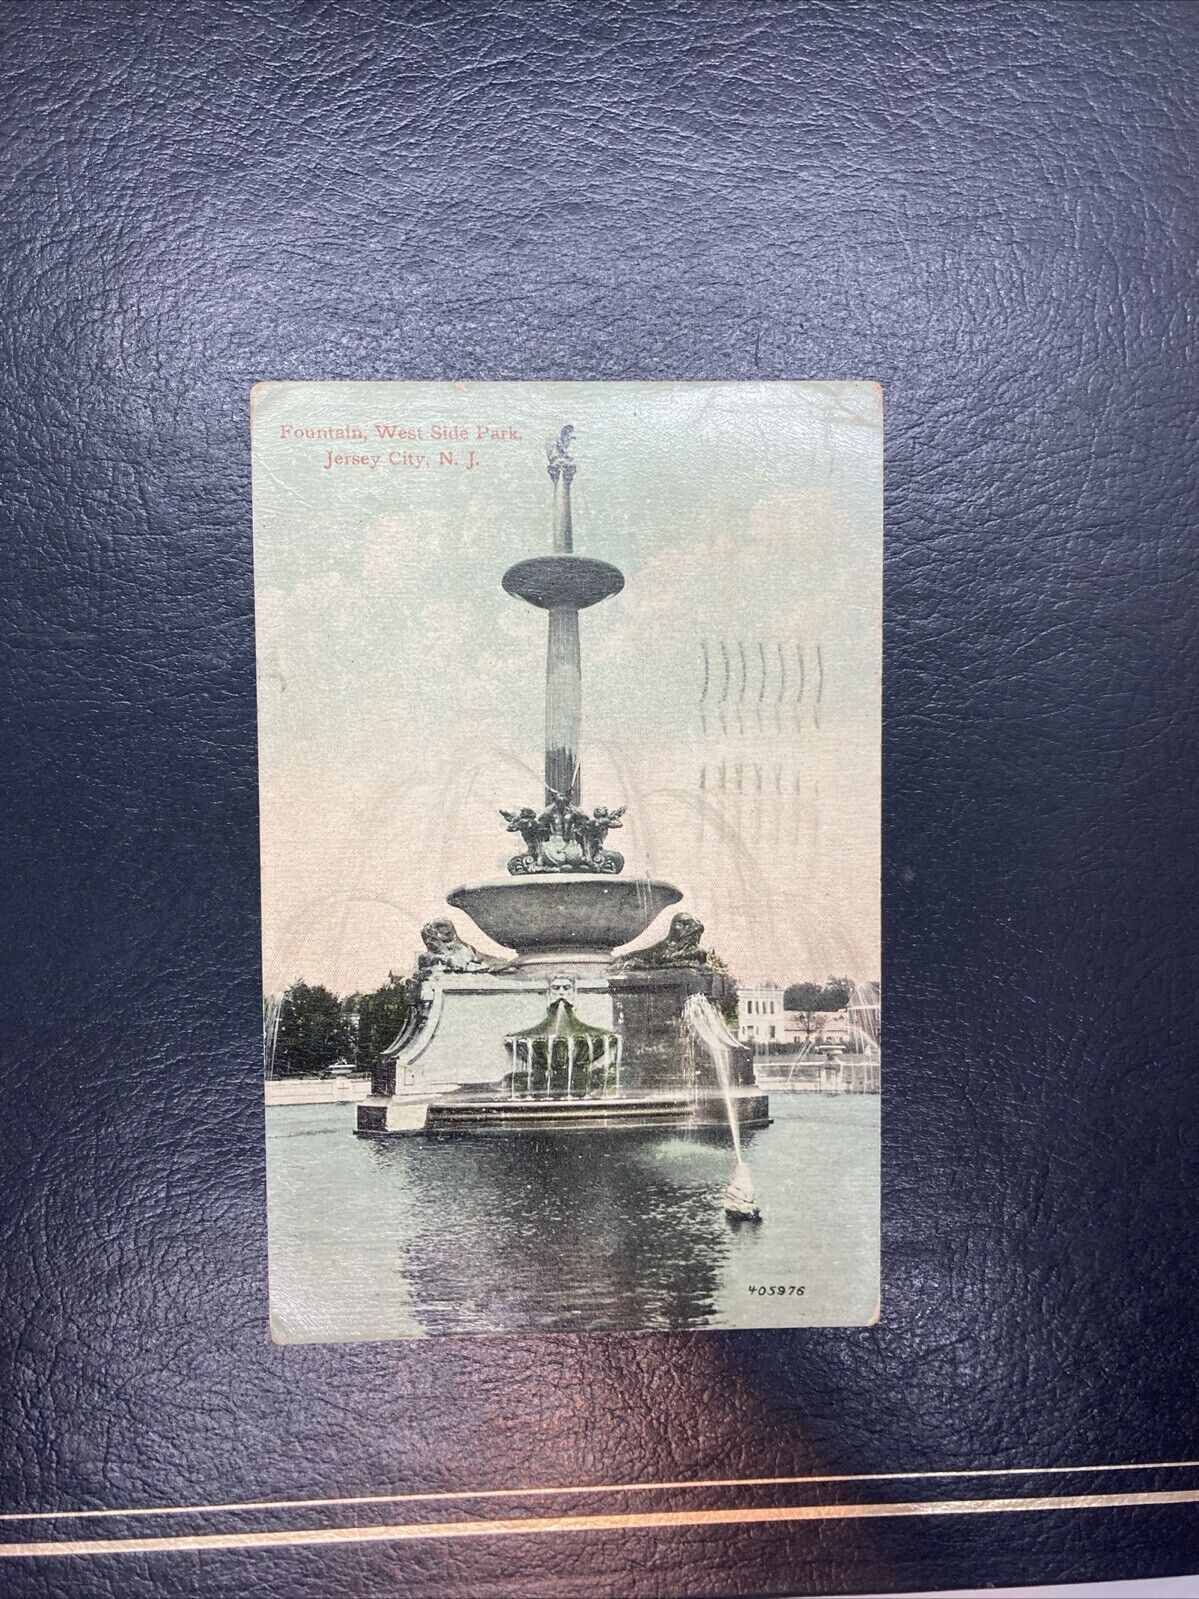 1914 Fountain West Side Park Layer Statue Jersey City New Jersey NJ Postcard